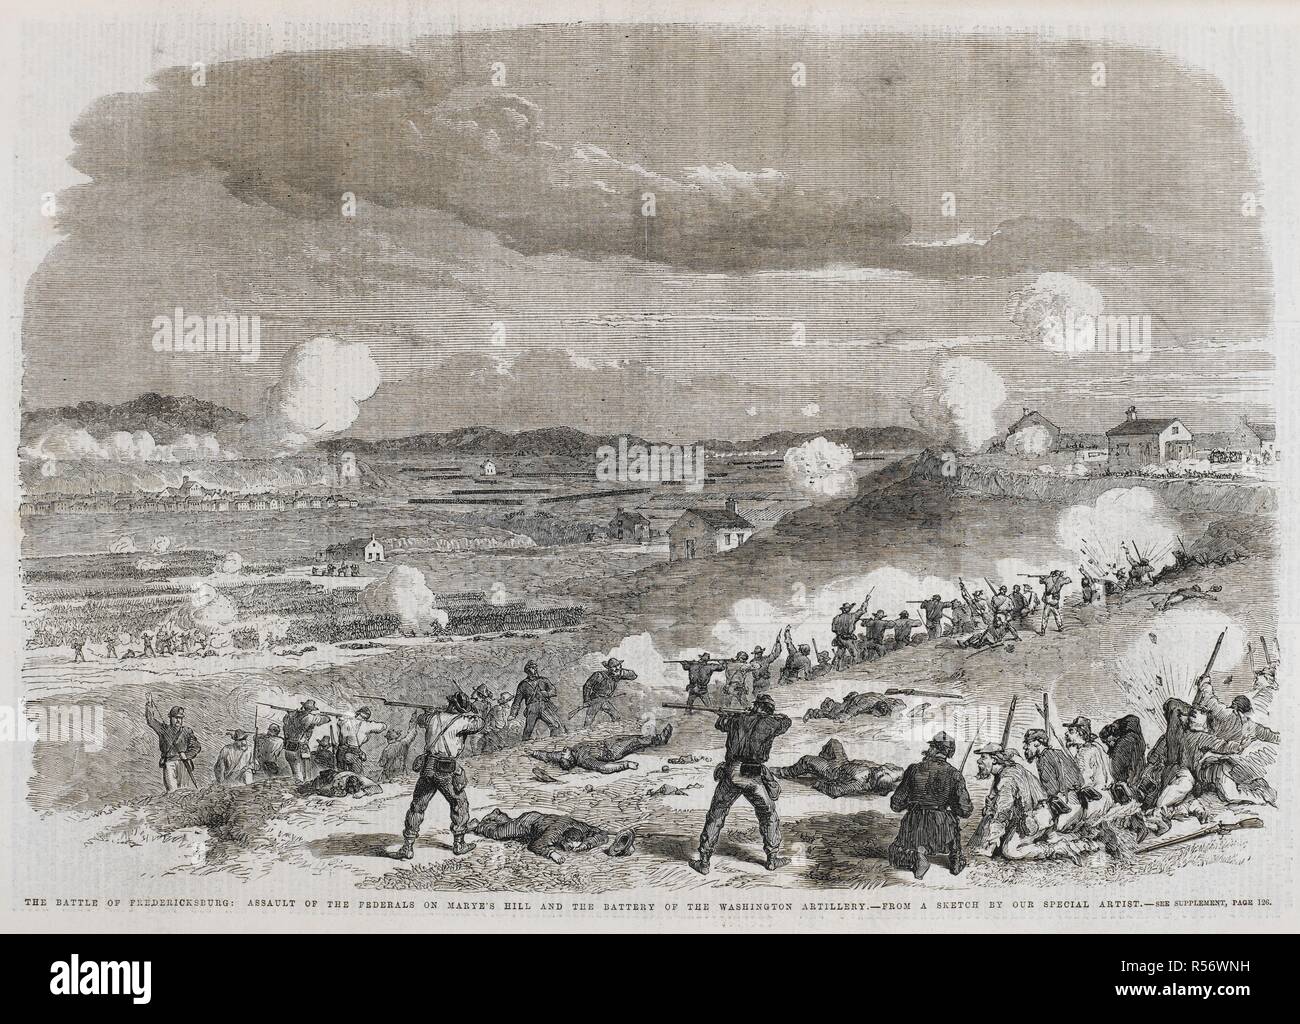 The battle of Fredericksburg : Assault of the Federals on Marye's hill and the battery of the Washington artillery. Illustrated London News. London, January 31 1863. American civil war. Source: P.P.7611 page 117 volume 42. Stock Photo